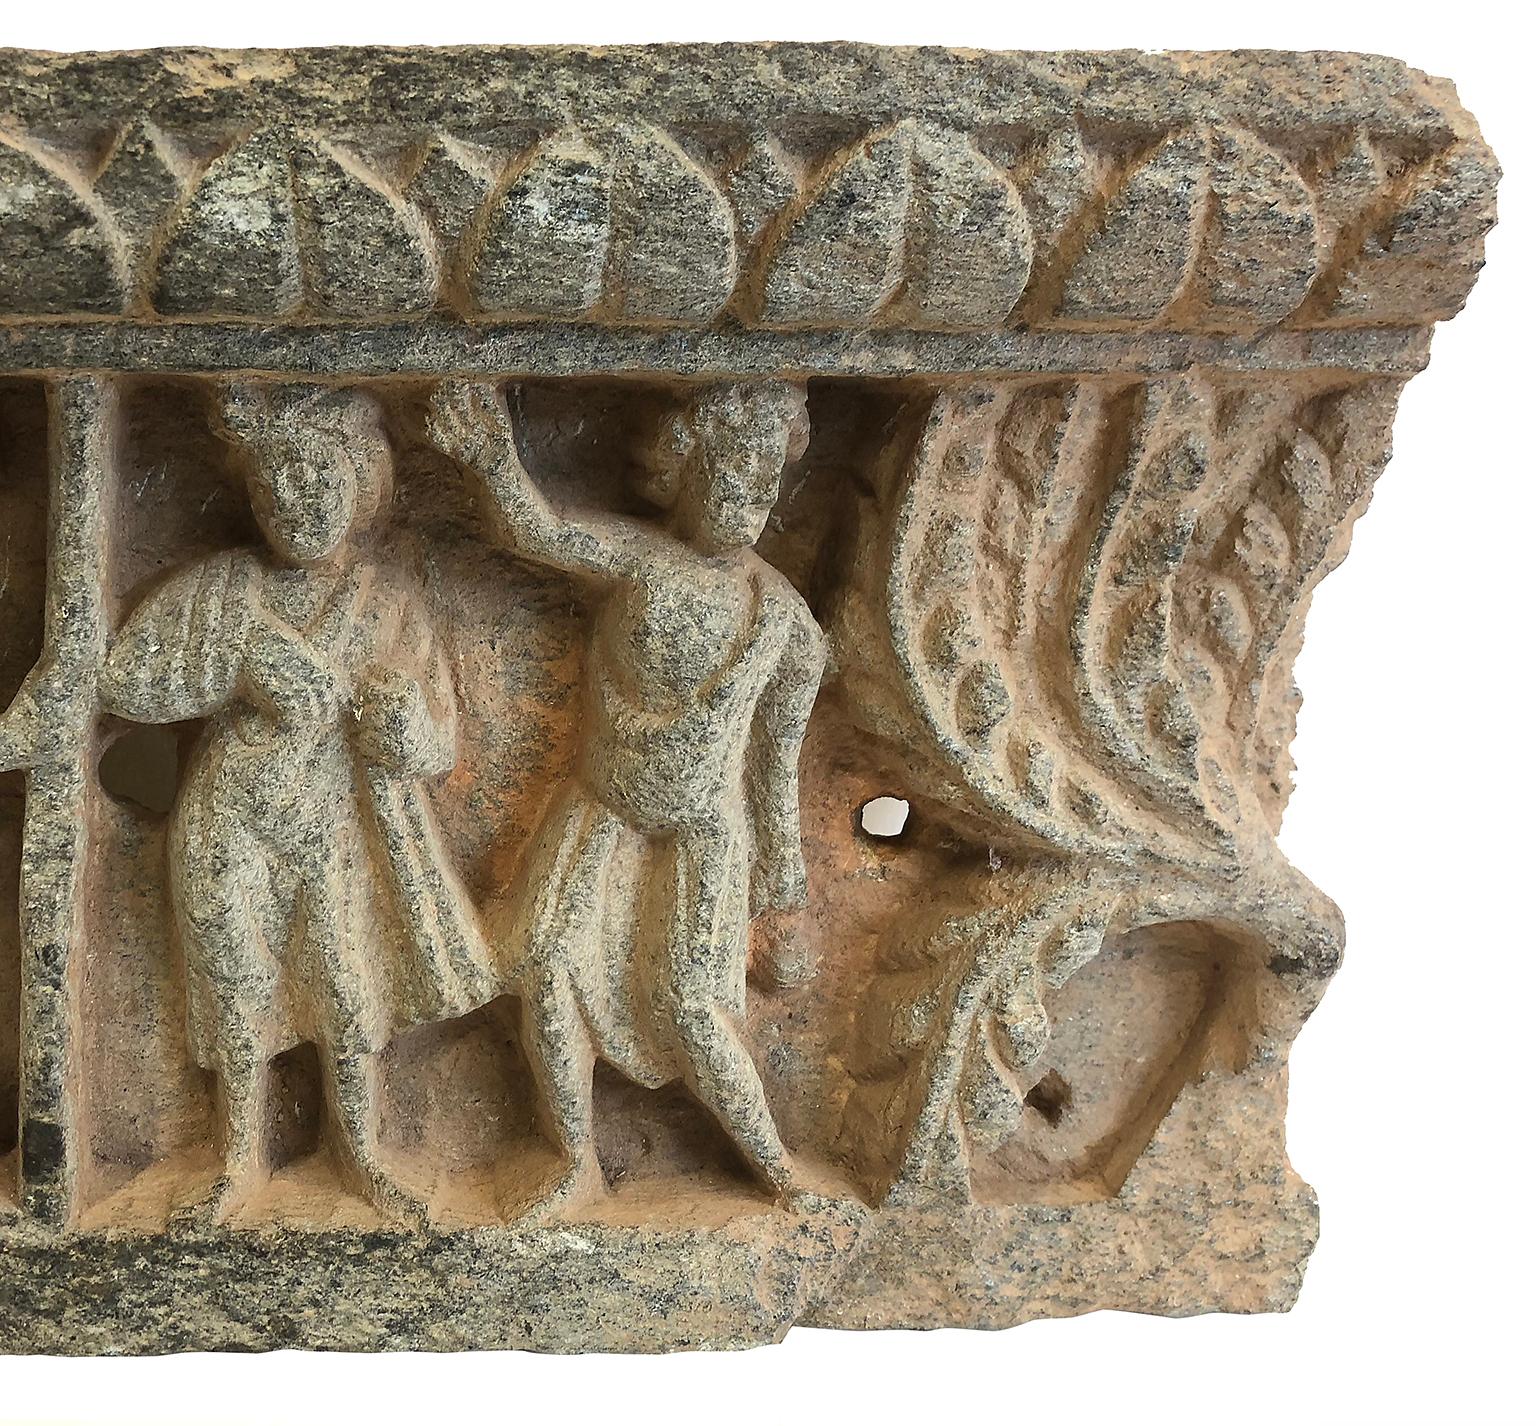 Schist stone frieze in two panels, showing a group of donors with a palm tree in the right corner. This is a fine example of Gandhara sculpture with exceptional provenance and exhibition history.

The Kingdom of Gandhara, was located in the region